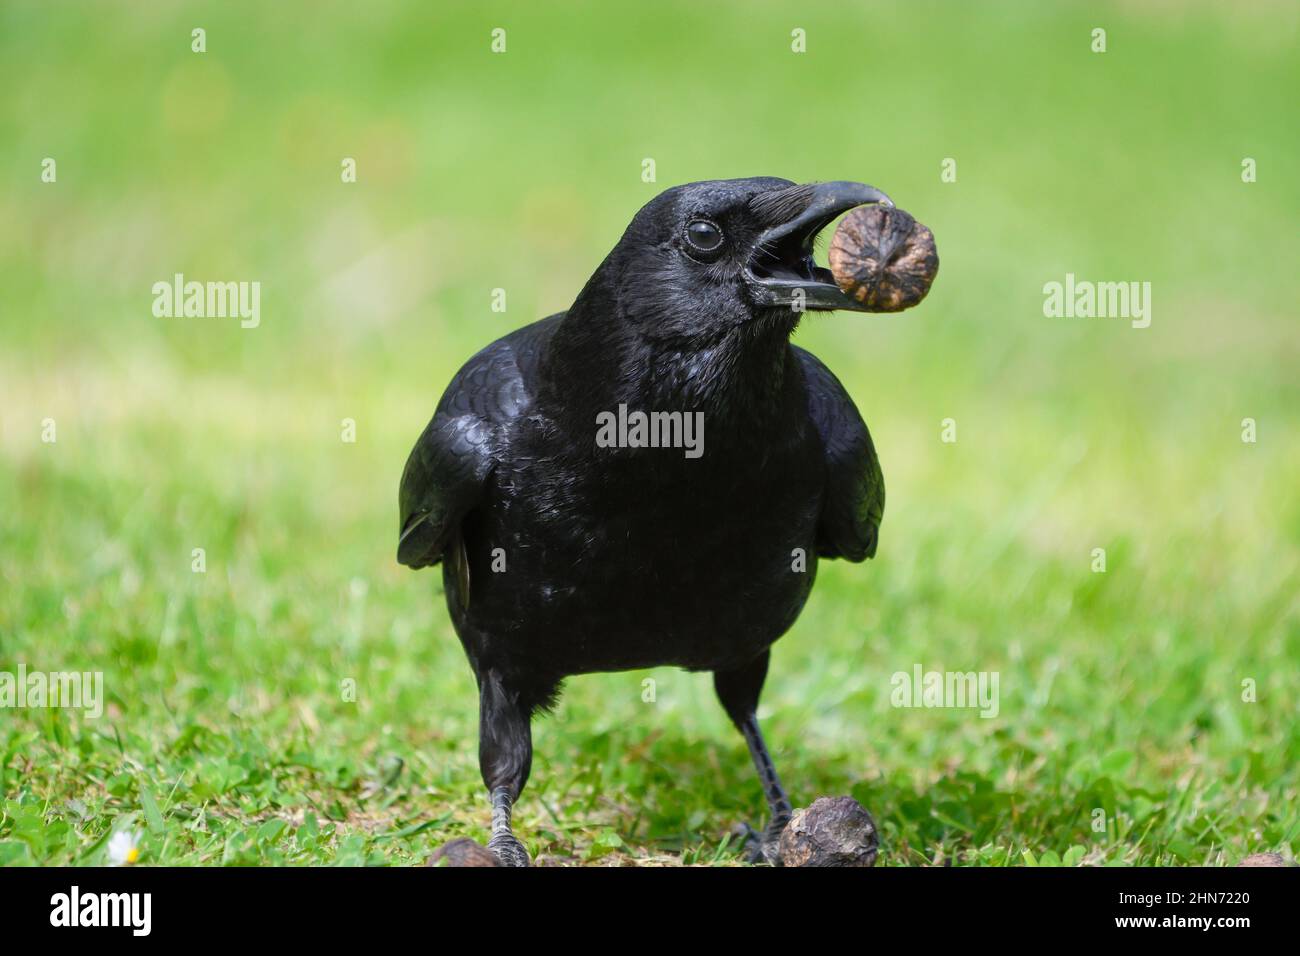 closeup of a carrion crow carrying a walnut in its beak Stock Photo